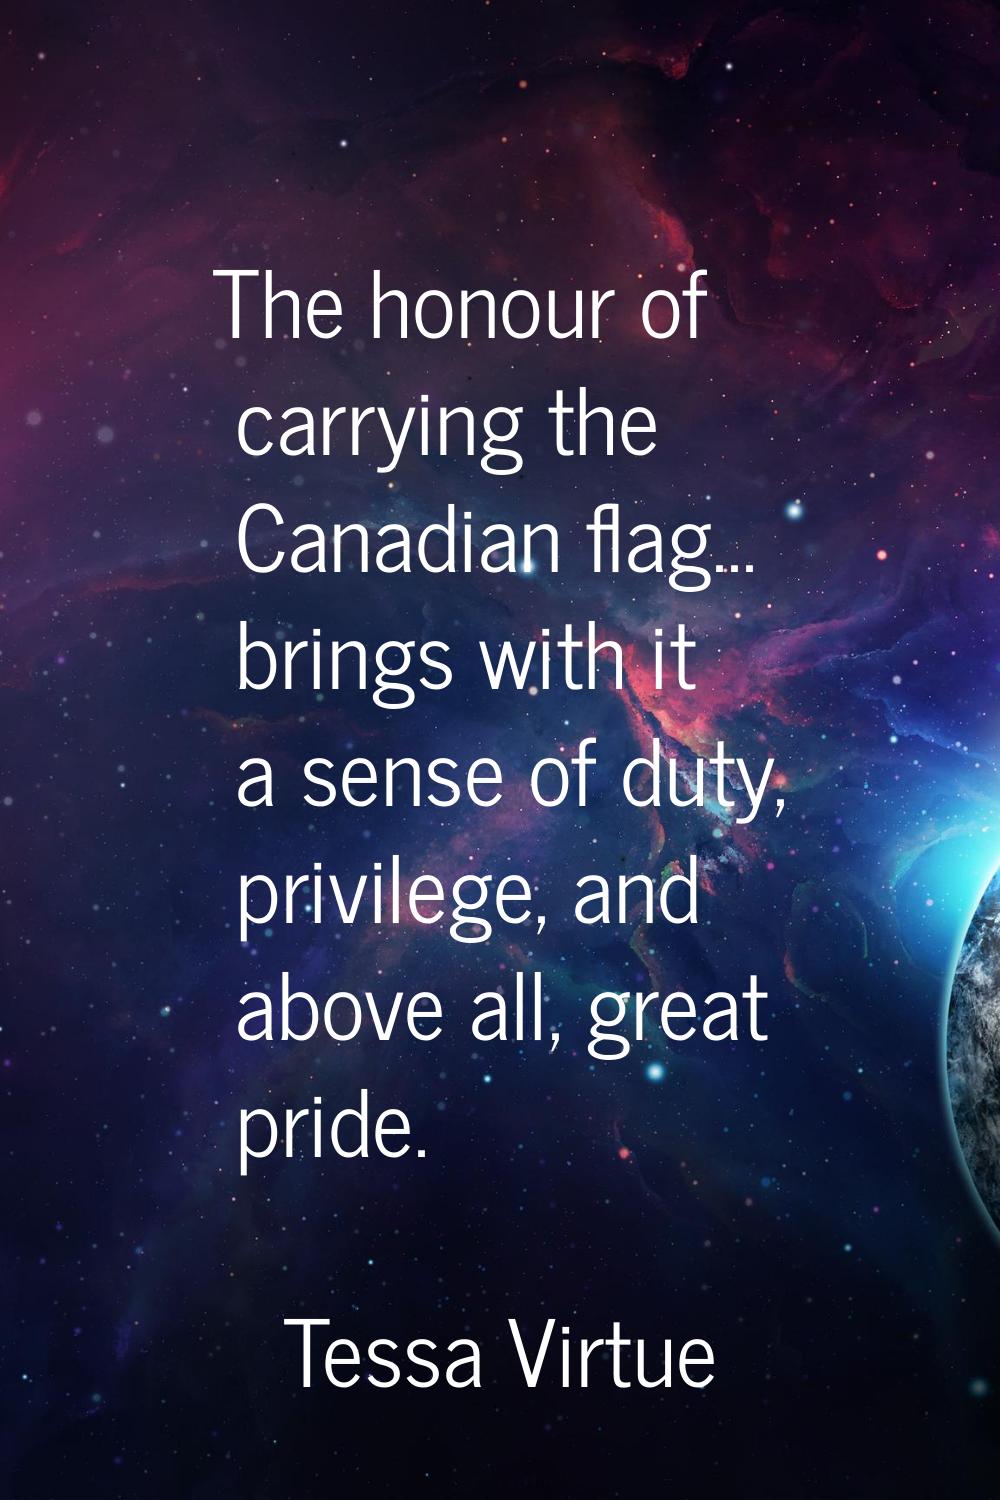 The honour of carrying the Canadian flag... brings with it a sense of duty, privilege, and above al